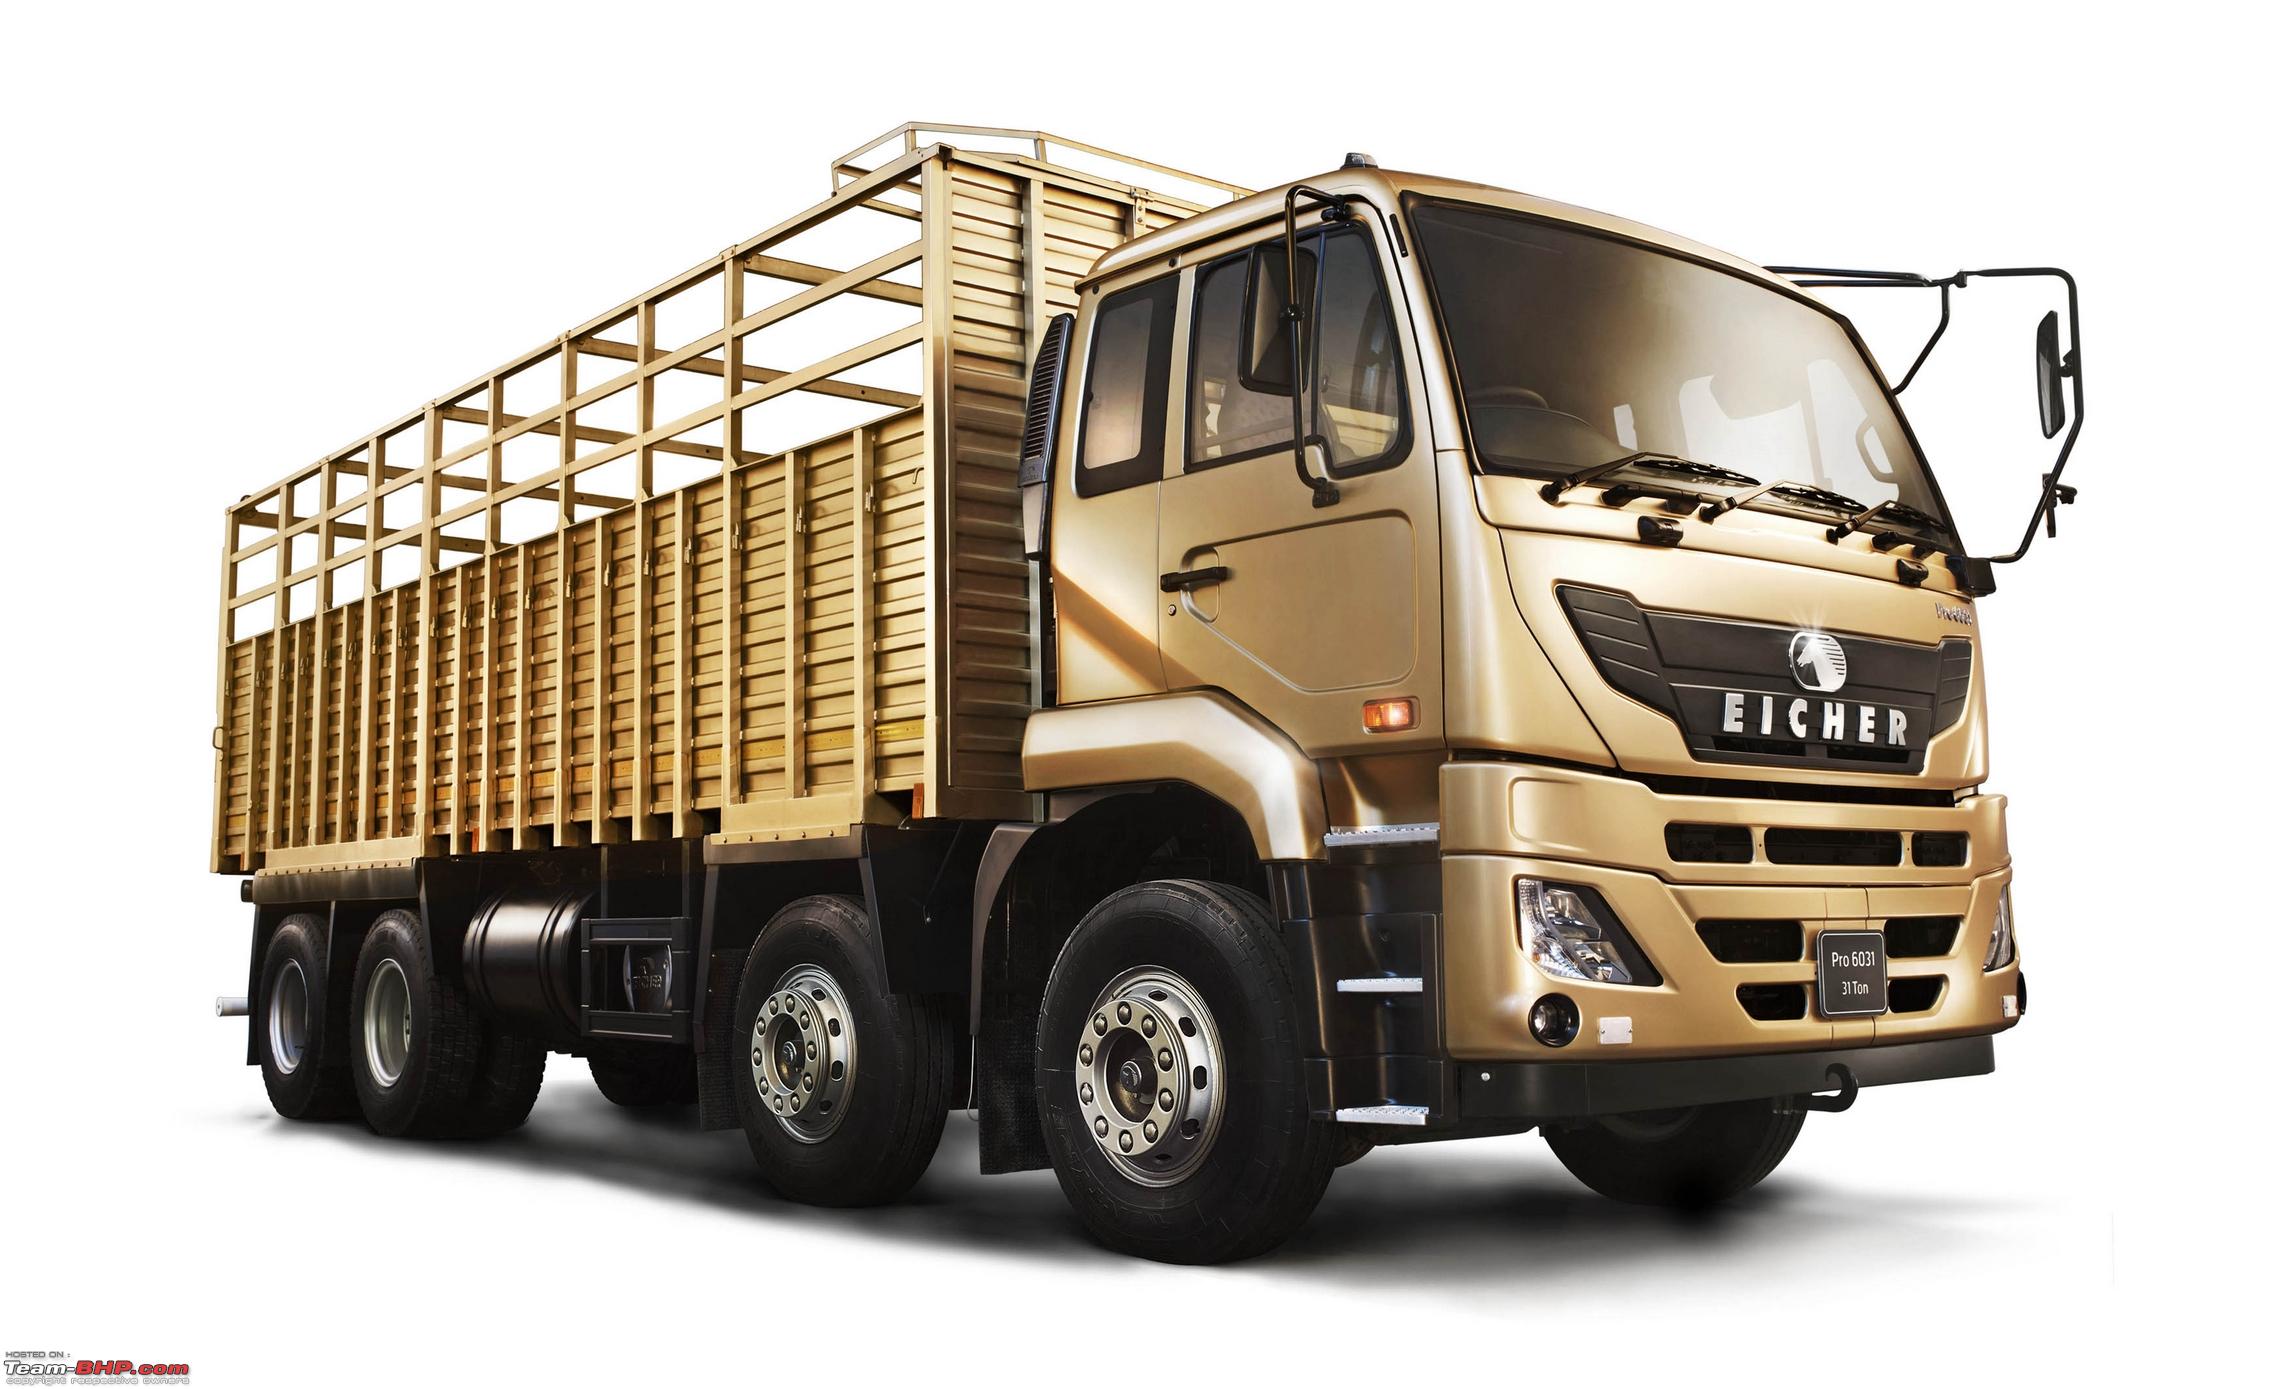 Eicher Pro 6000 Series launched in West India markets TeamBHP